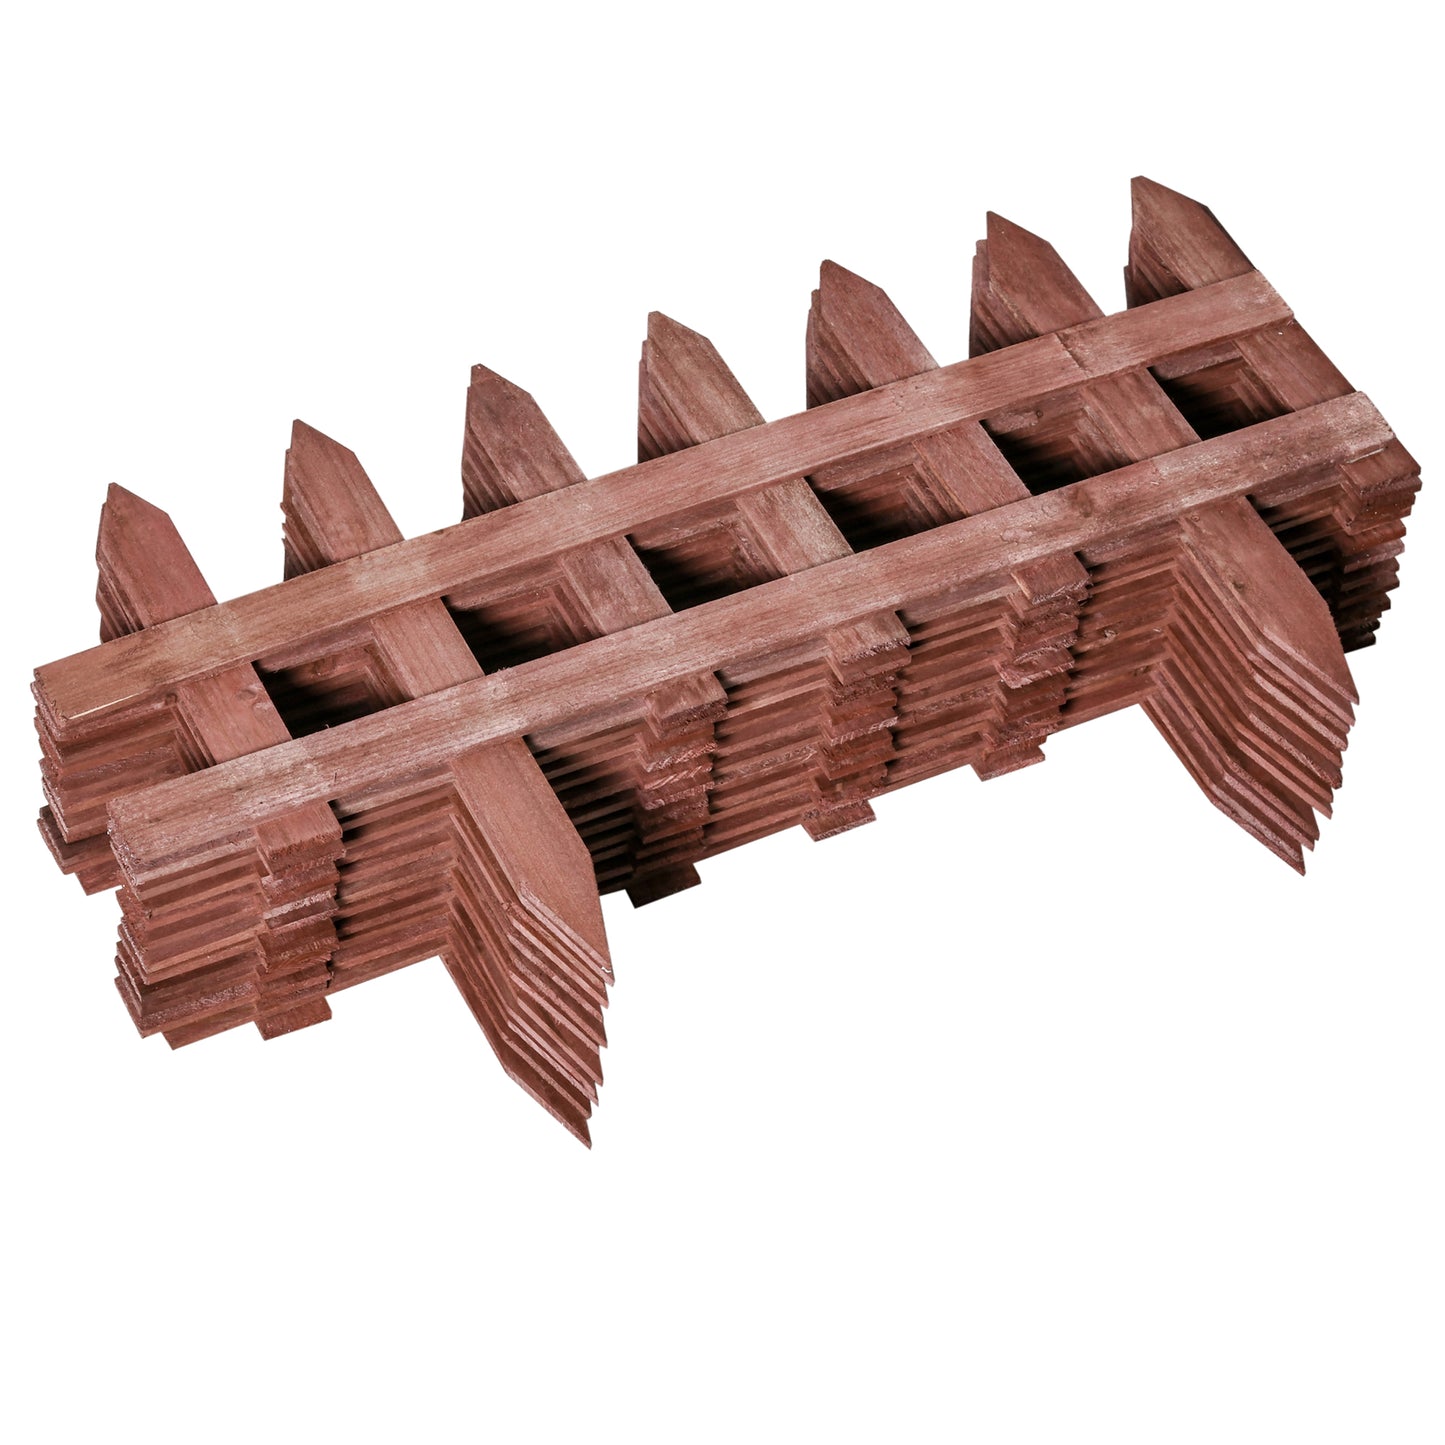 Outsunny Set of 12 Wooden 60cm Garden Fence Pieces